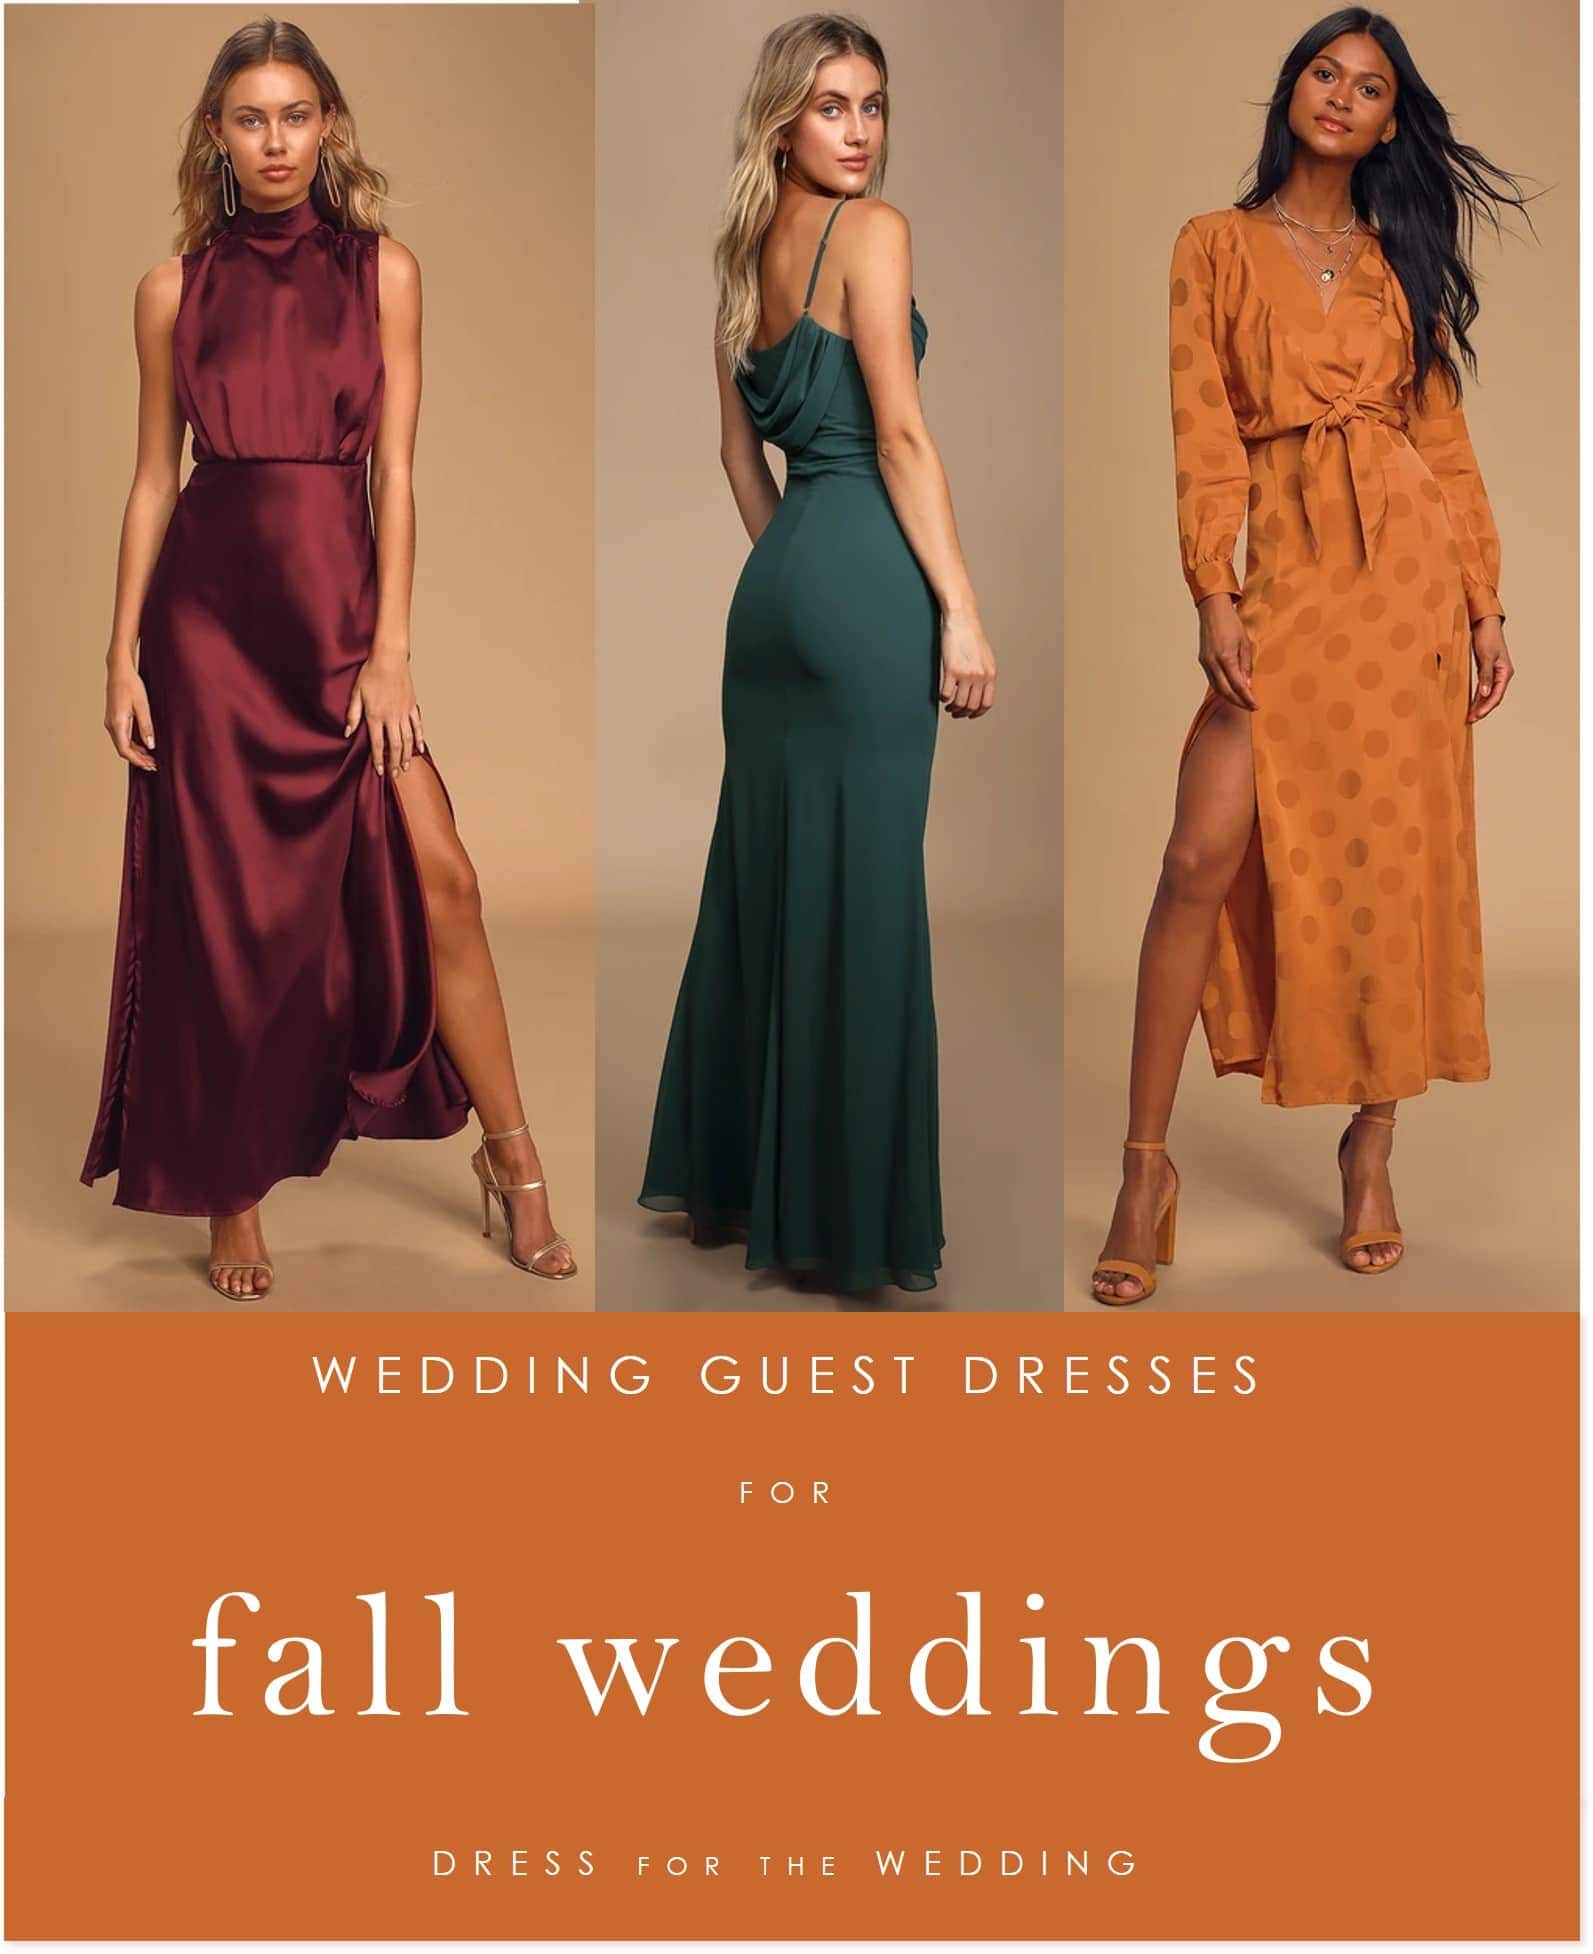 dresses to wear to a formal wedding as a guest